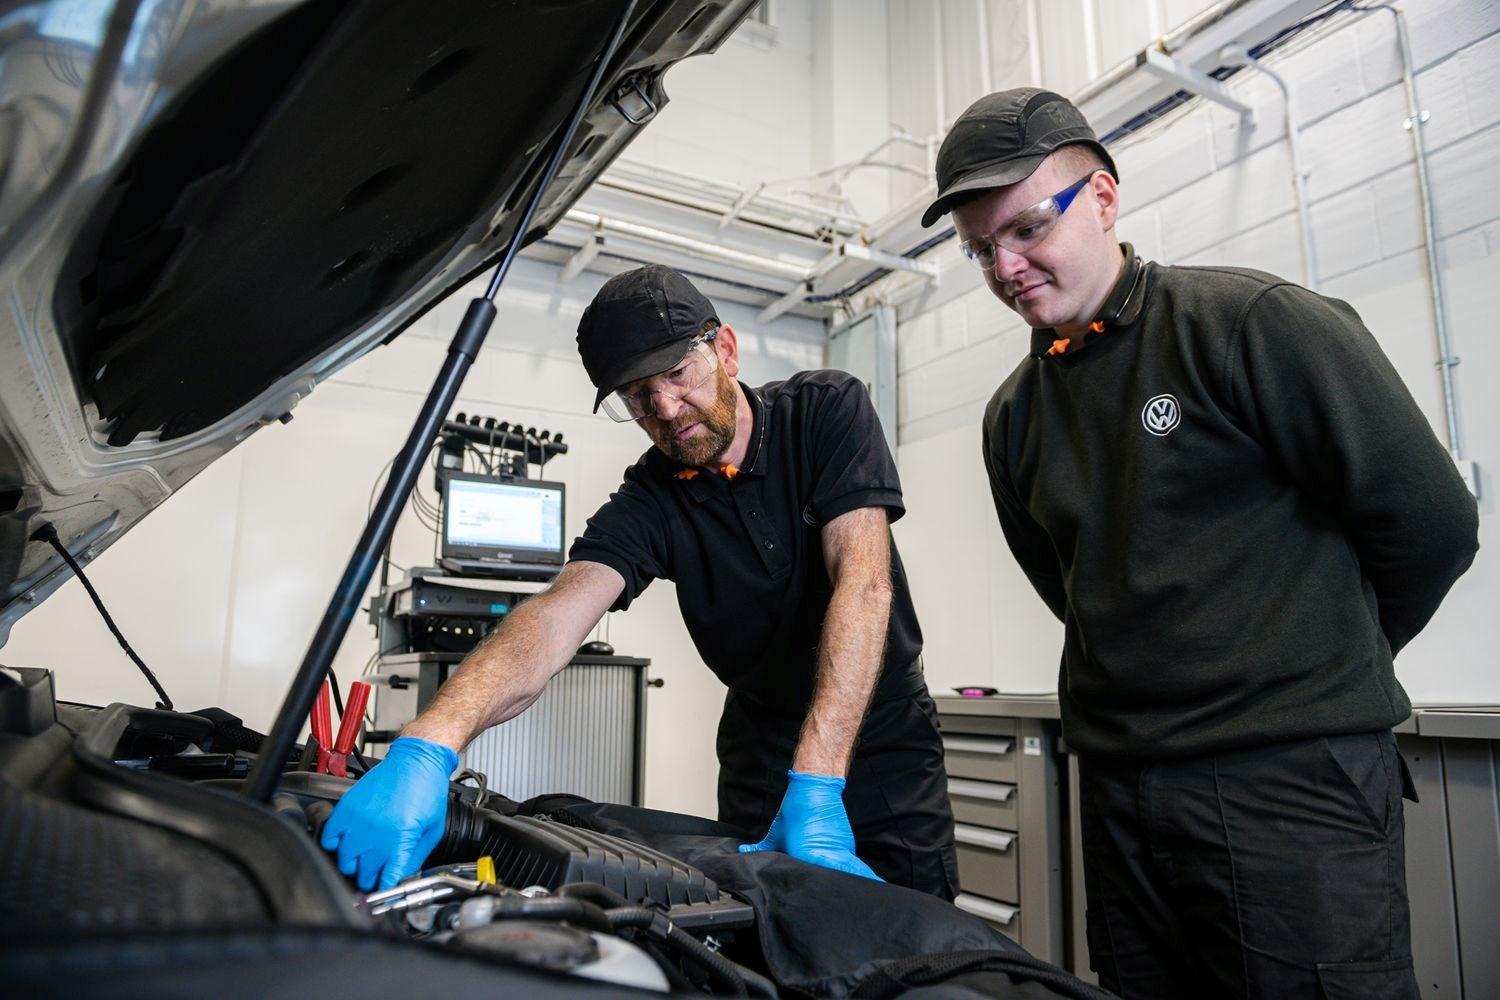 Two Volkswagen Service Specialists check under the hood of a used Volkswagen Golf for servicing and maintenance at the Volkswagen Approved Accident Repair Centre, Agnew Volkswagen Belfast